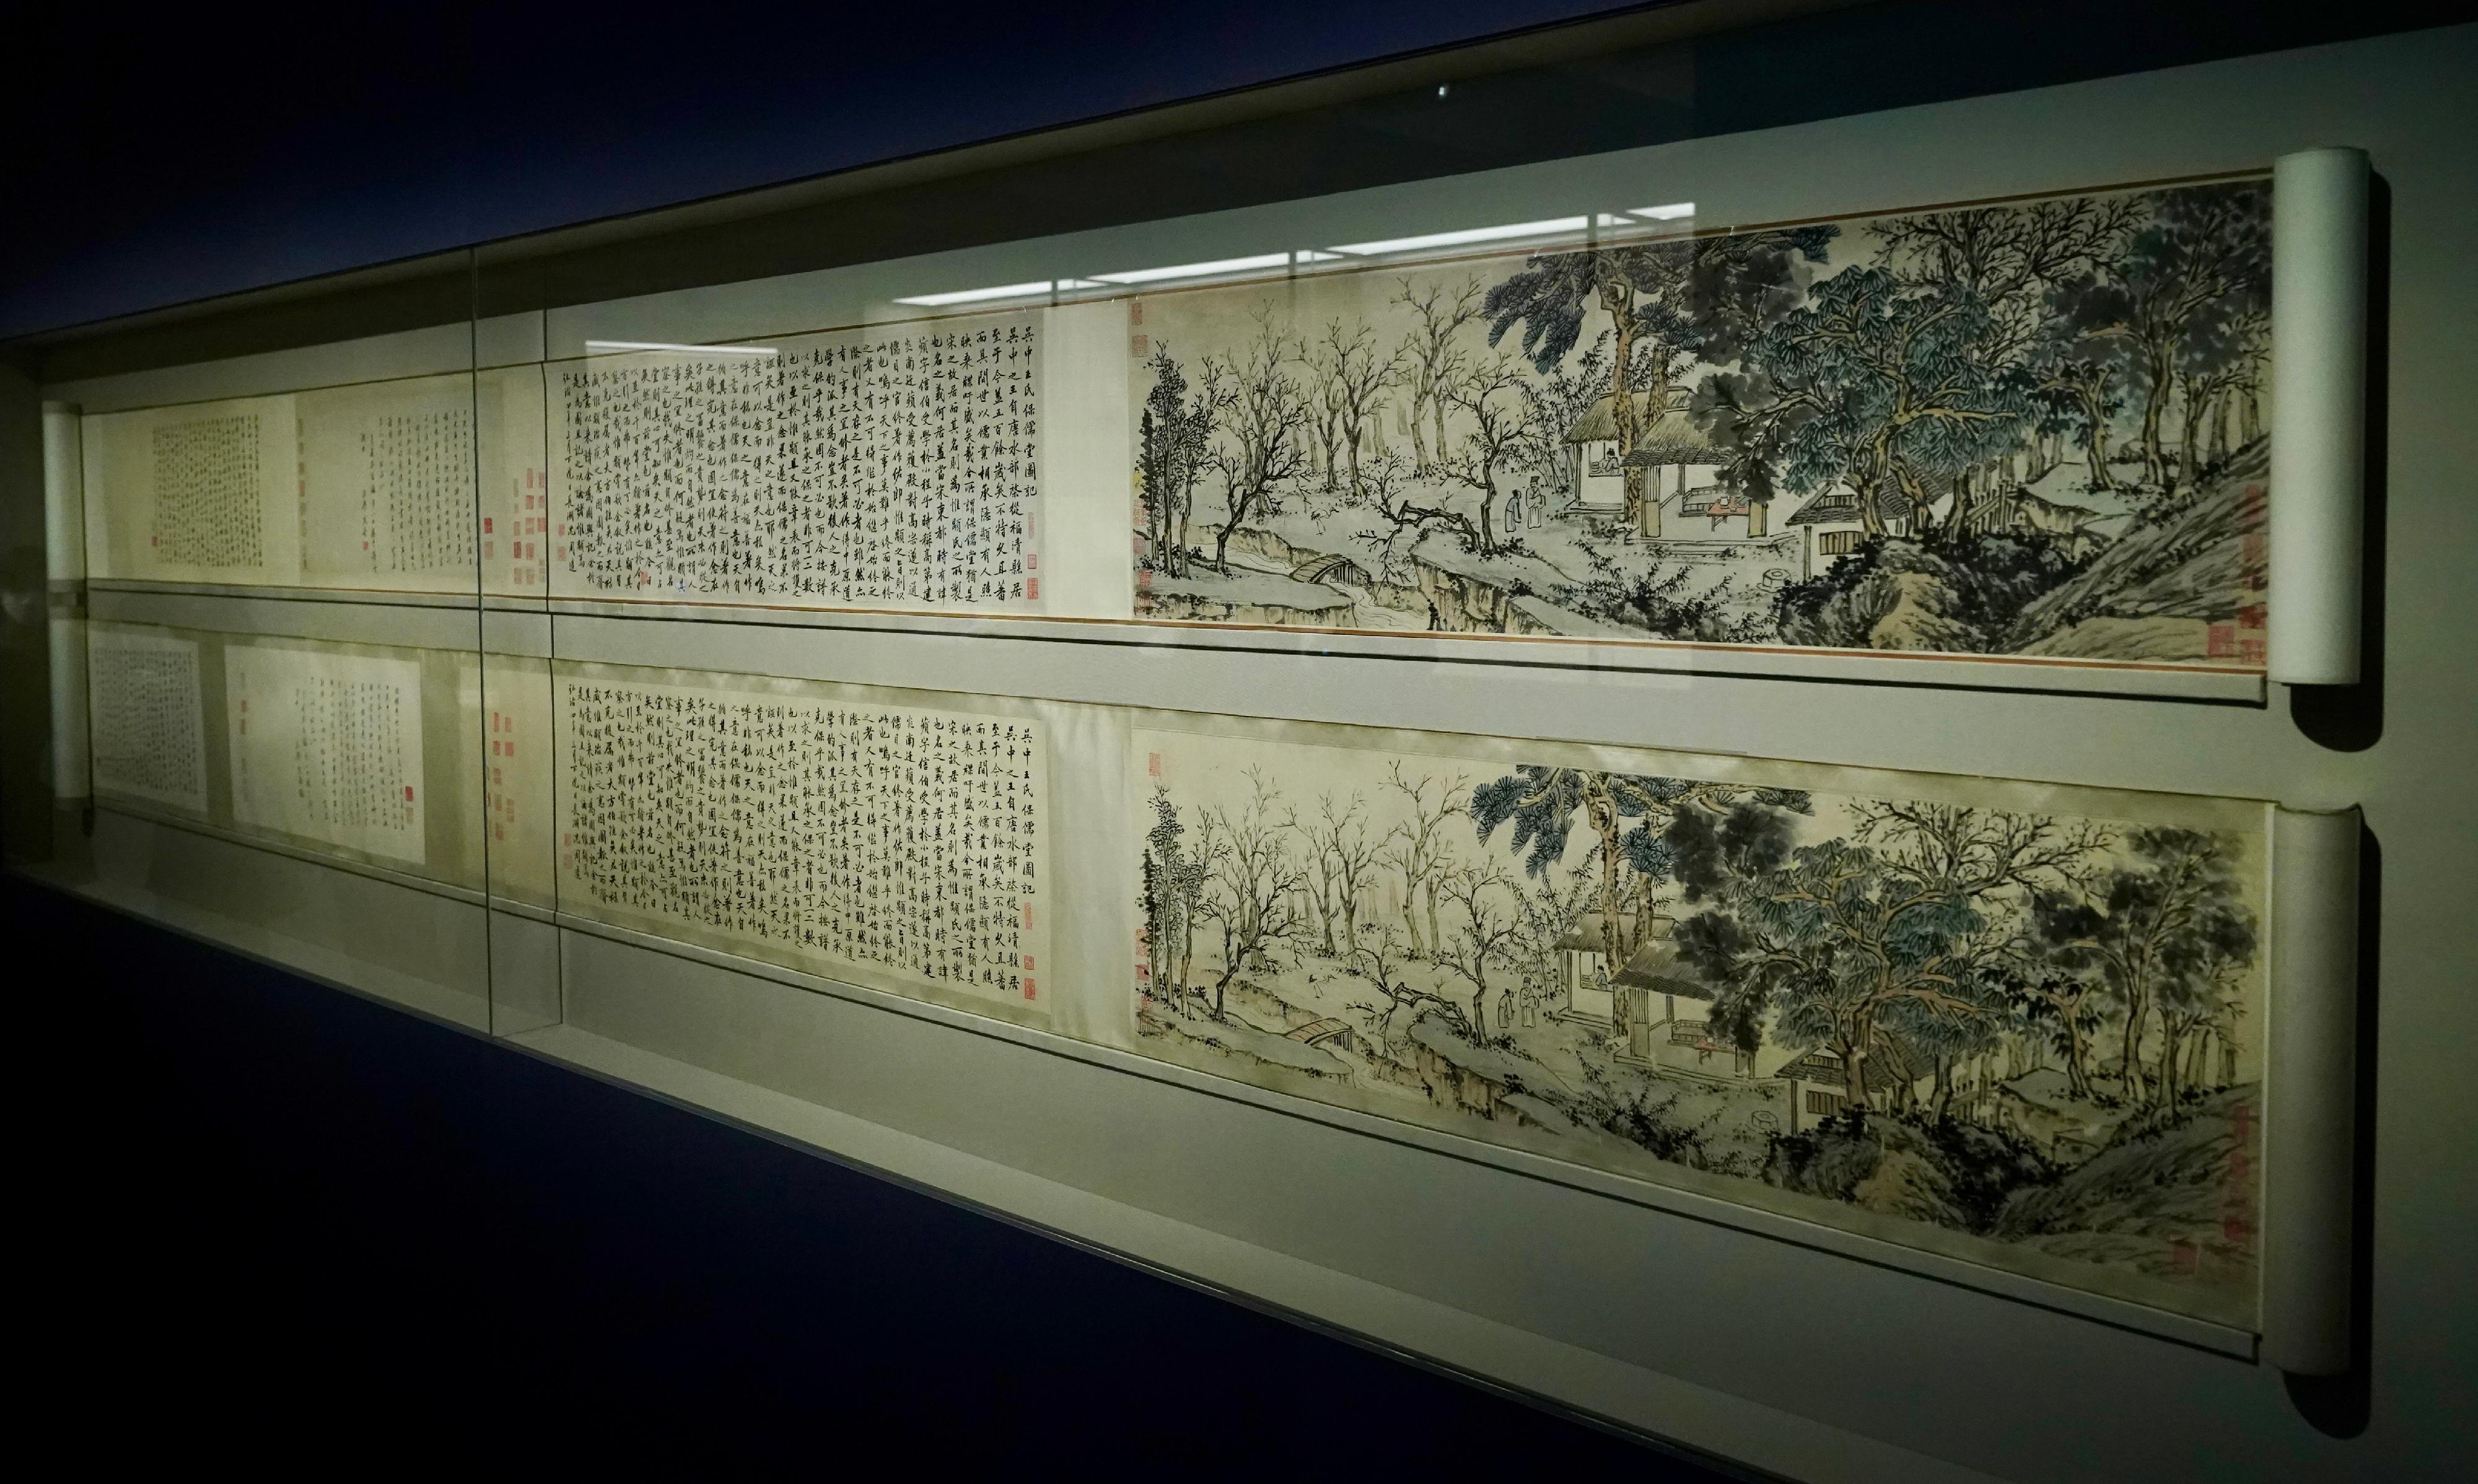 The Hong Kong Museum of Art will launch a new exhibition, "The Connoisseurship and Collection of the Master of Chih Lo Lou", tomorrow (December 9) highlighting memorable personal stories of the late Hong Kong collector Ho Iu-kwong, as well as his insights into the authentication and appreciation of Chinese painting and calligraphy. Photo shows "Hall of Preserving Confucianism" by Ming dynasty artist Shen Zhou and its copy. Visitors are invited to authenticate the two paintings and try to distinguish between authentic and forged artworks.